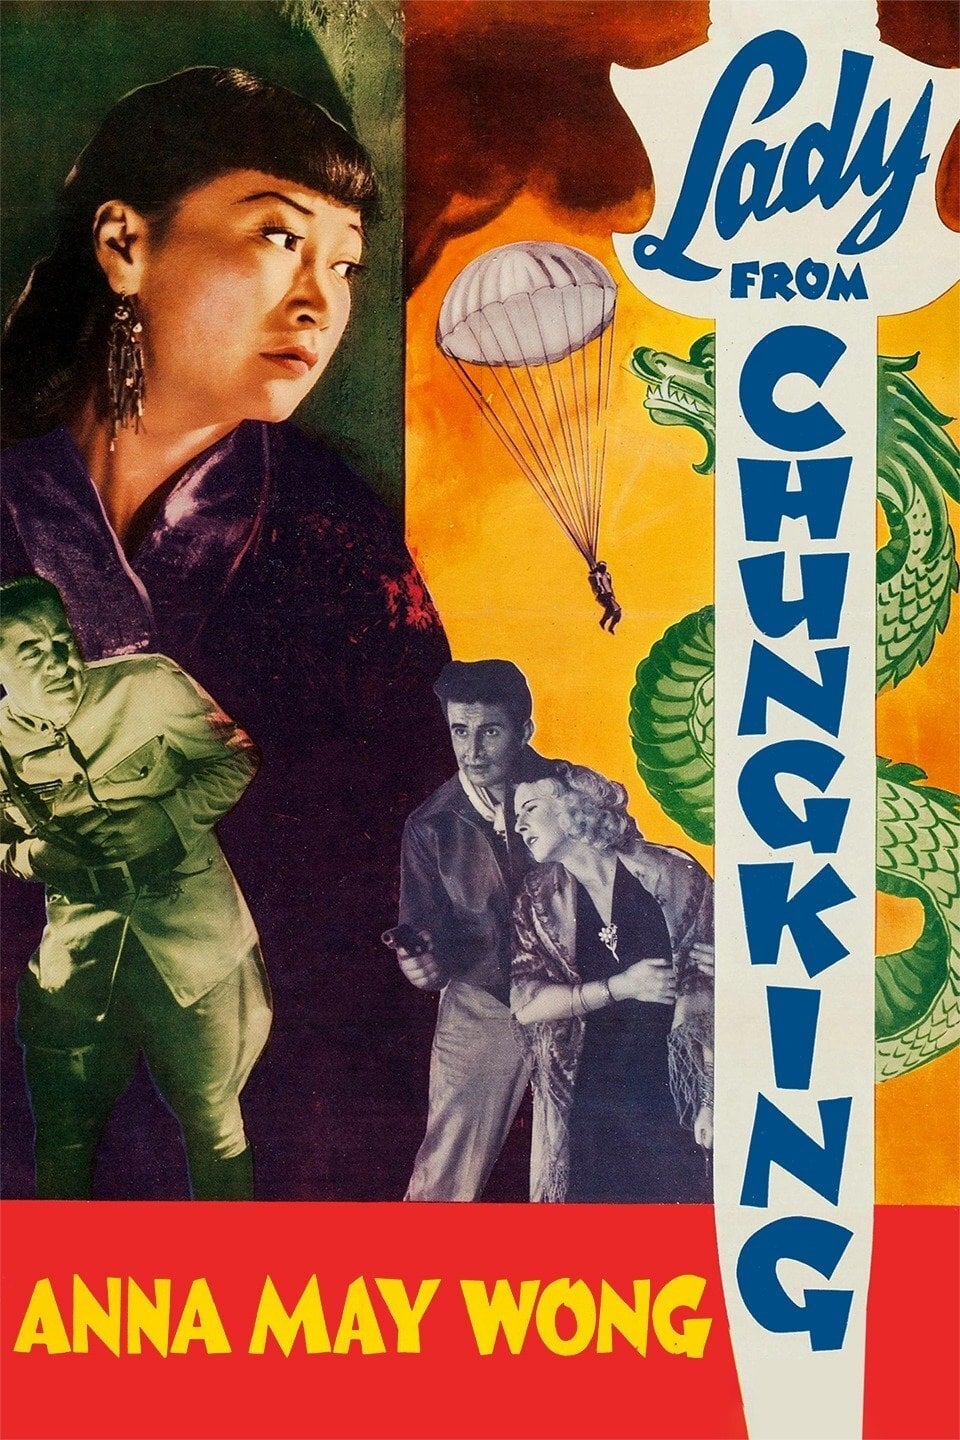 Lady from Chungking (1942)